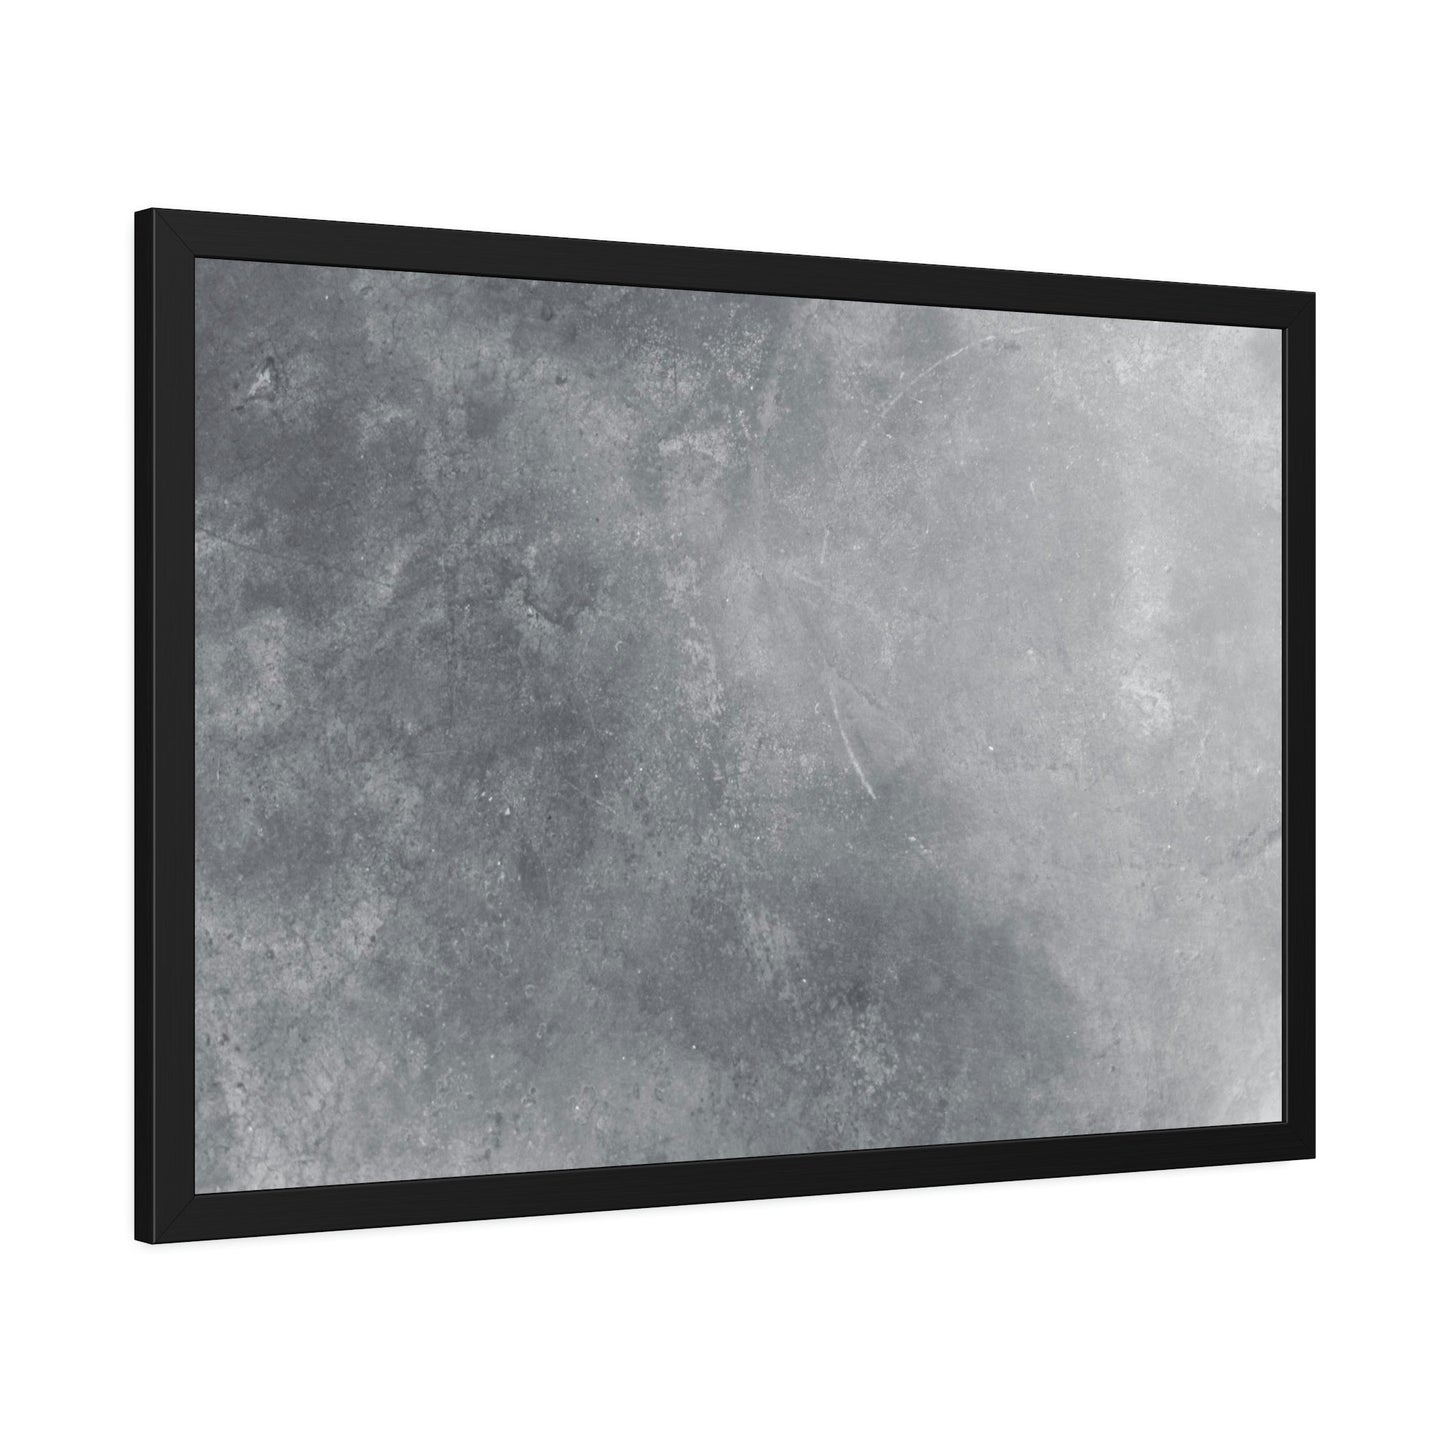 Shades of Gray: Poster & Canvas Wall Art for a Modern Look